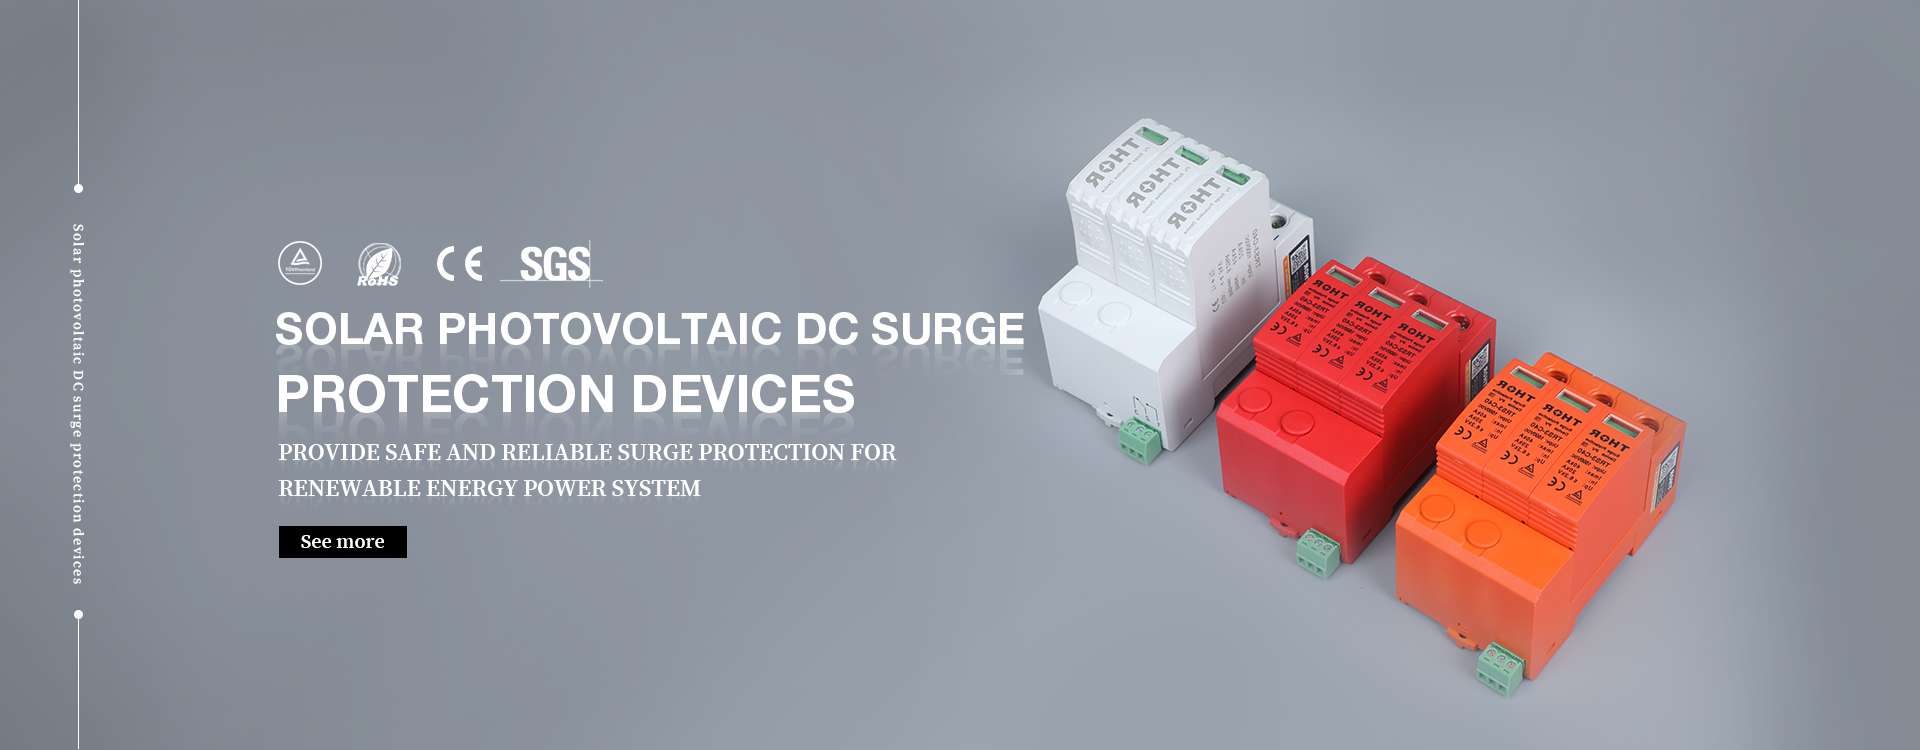 DC Surge Protection Device